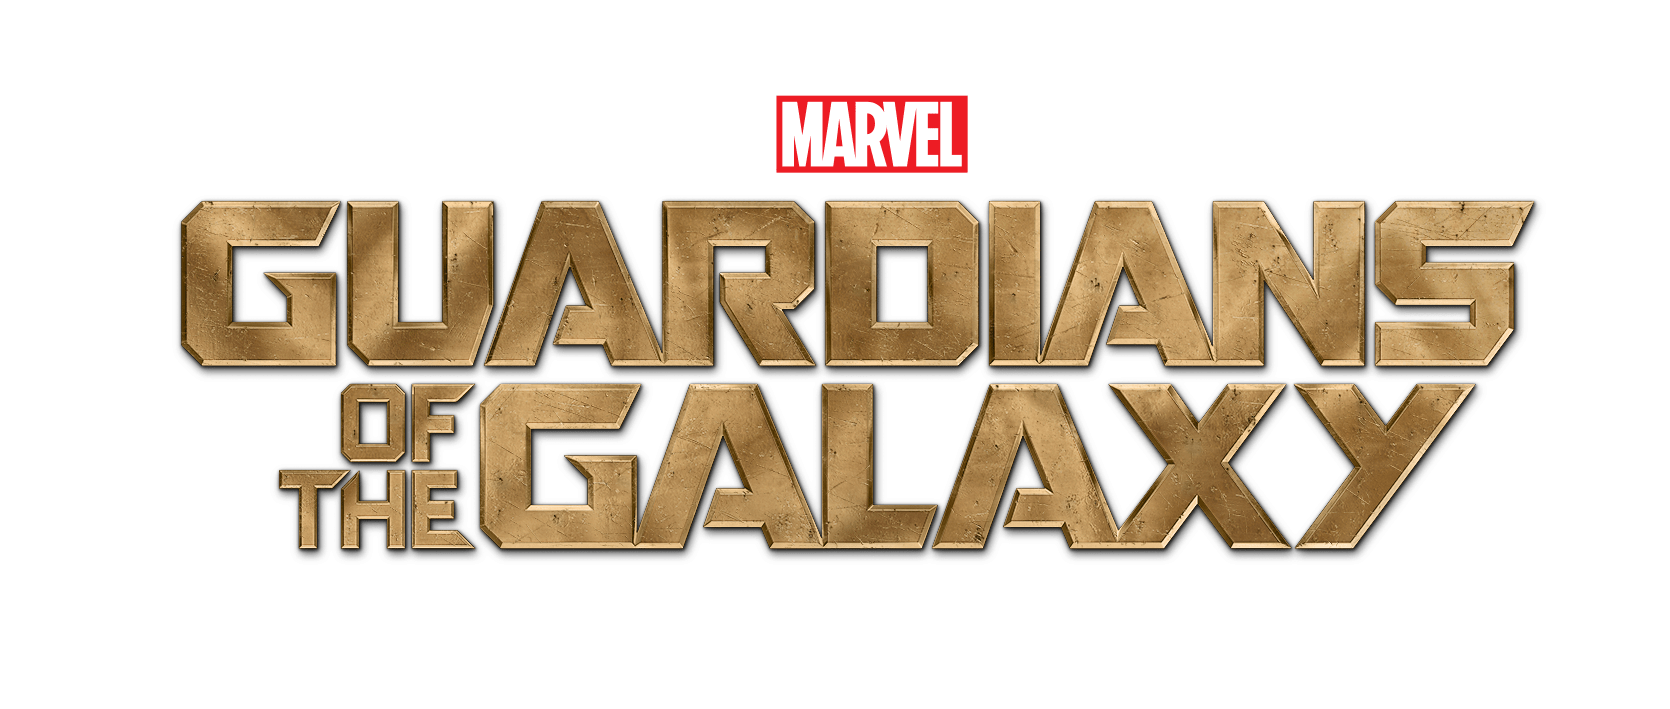 Guardians Of The Galaxy PNG Best Image pngteam.com